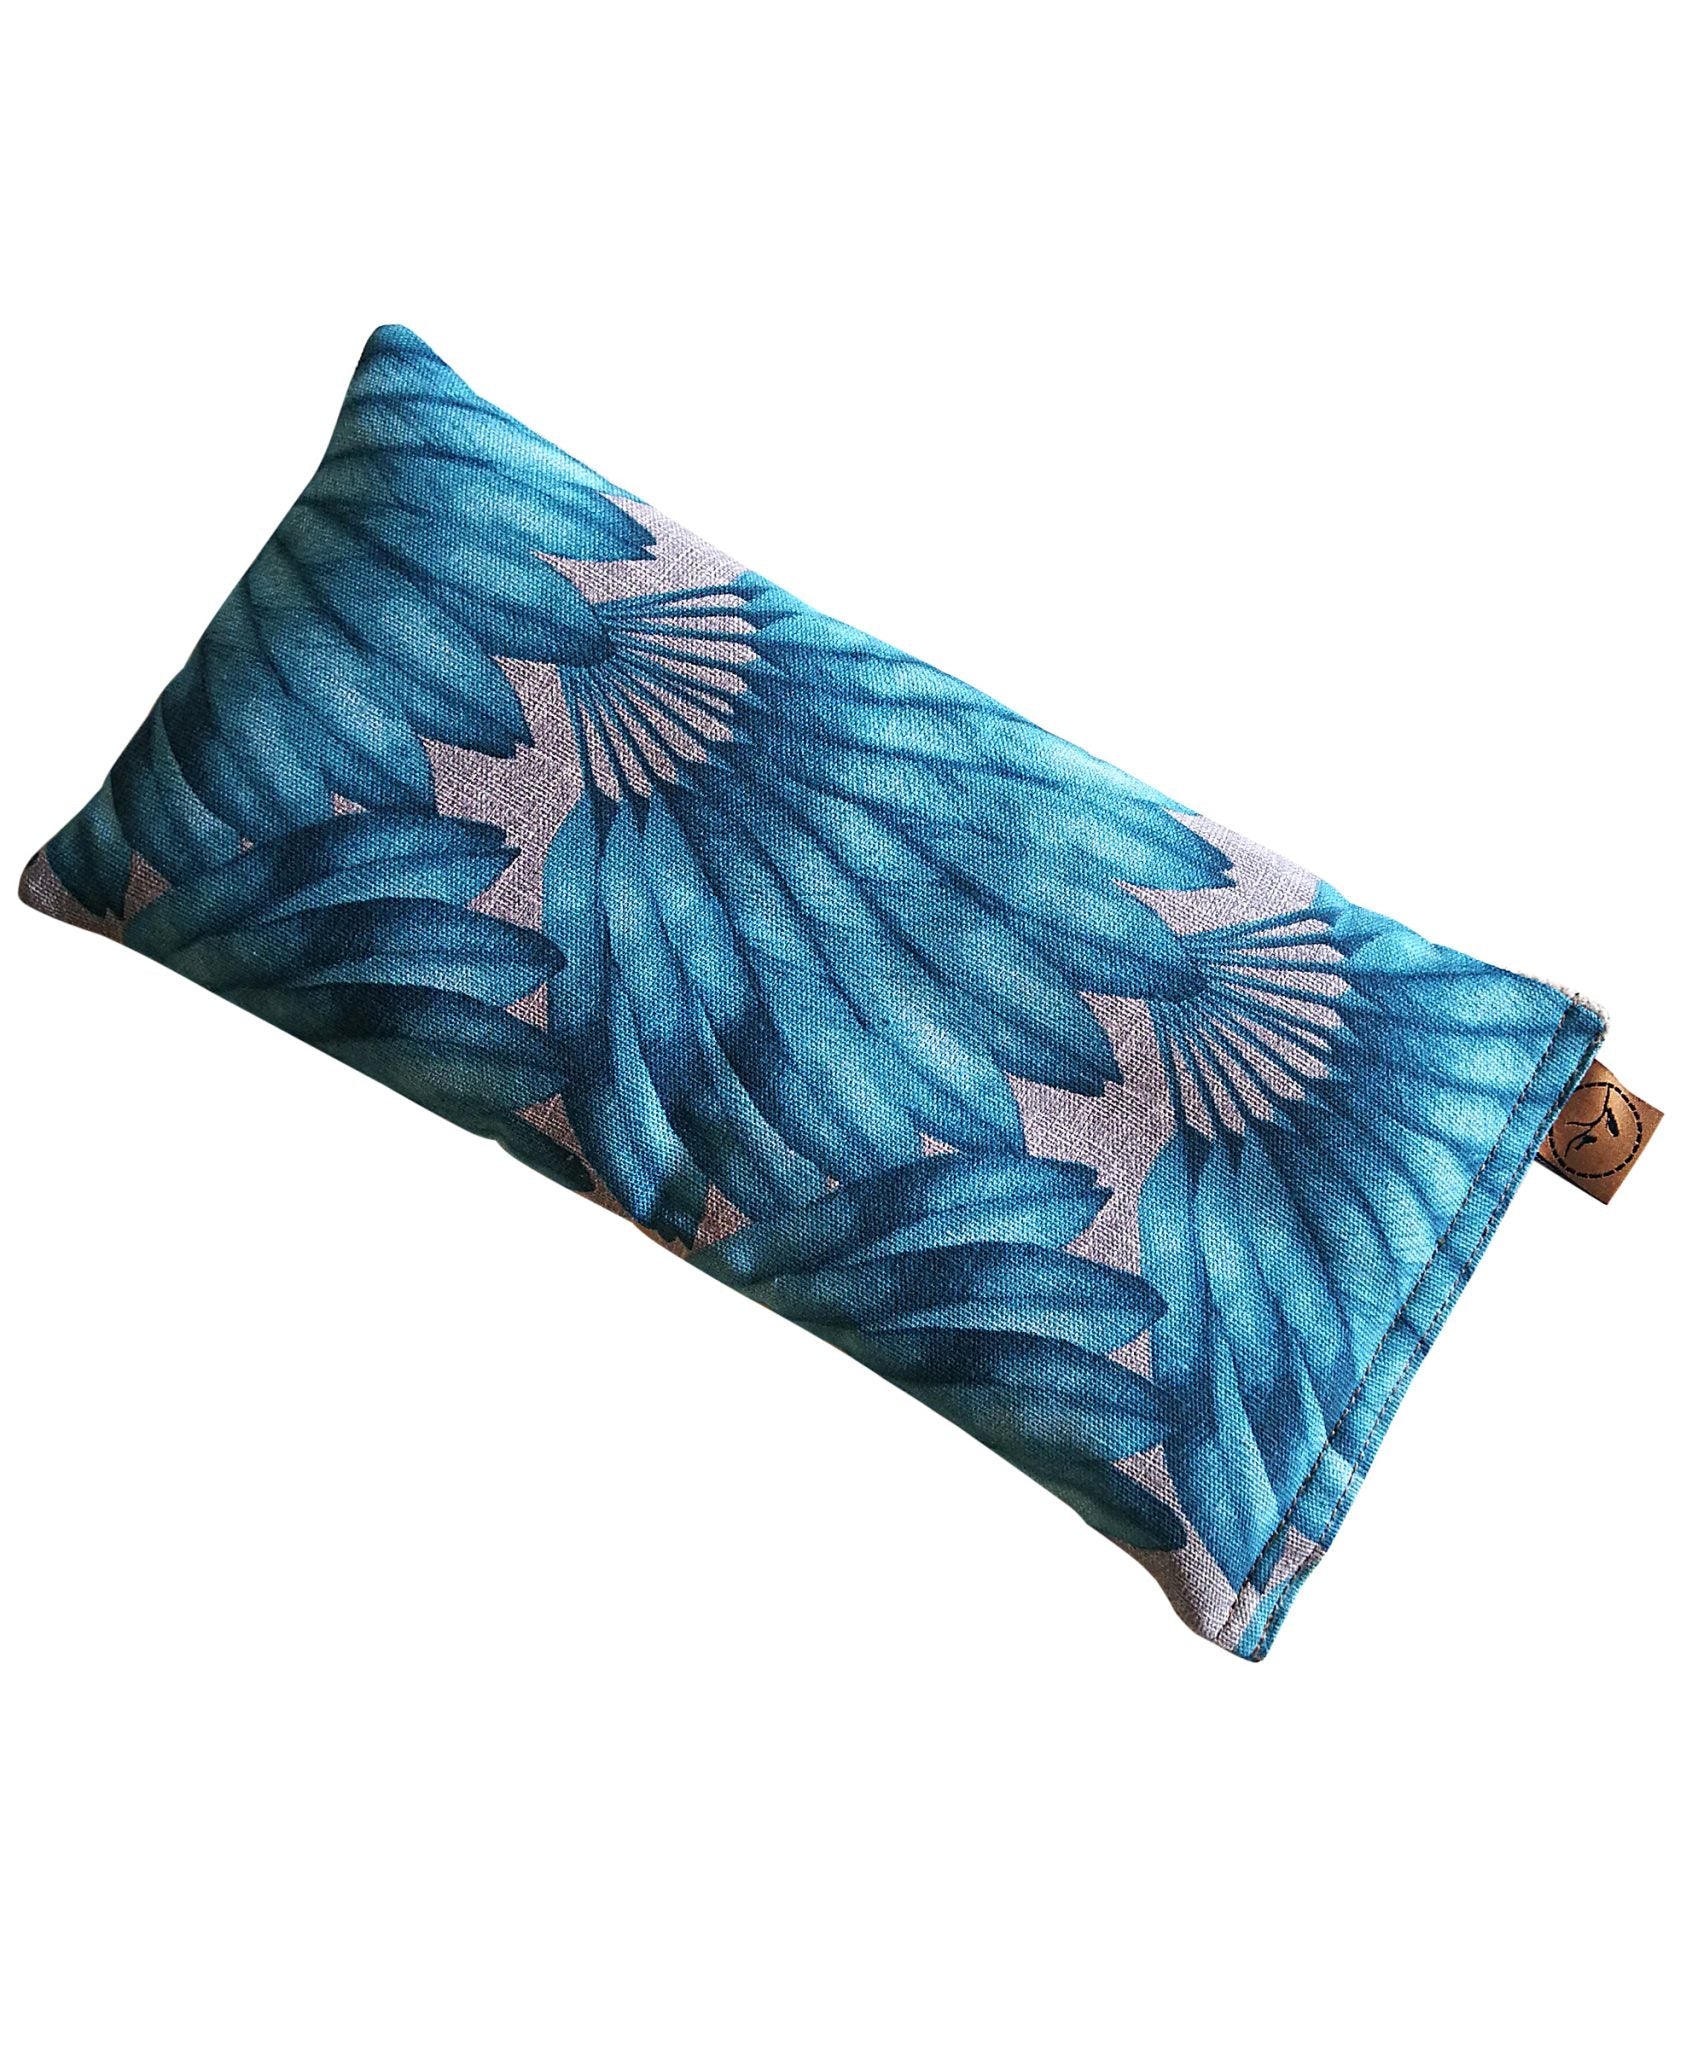 Sabine & Sparrow Teal Feather Heat Pack